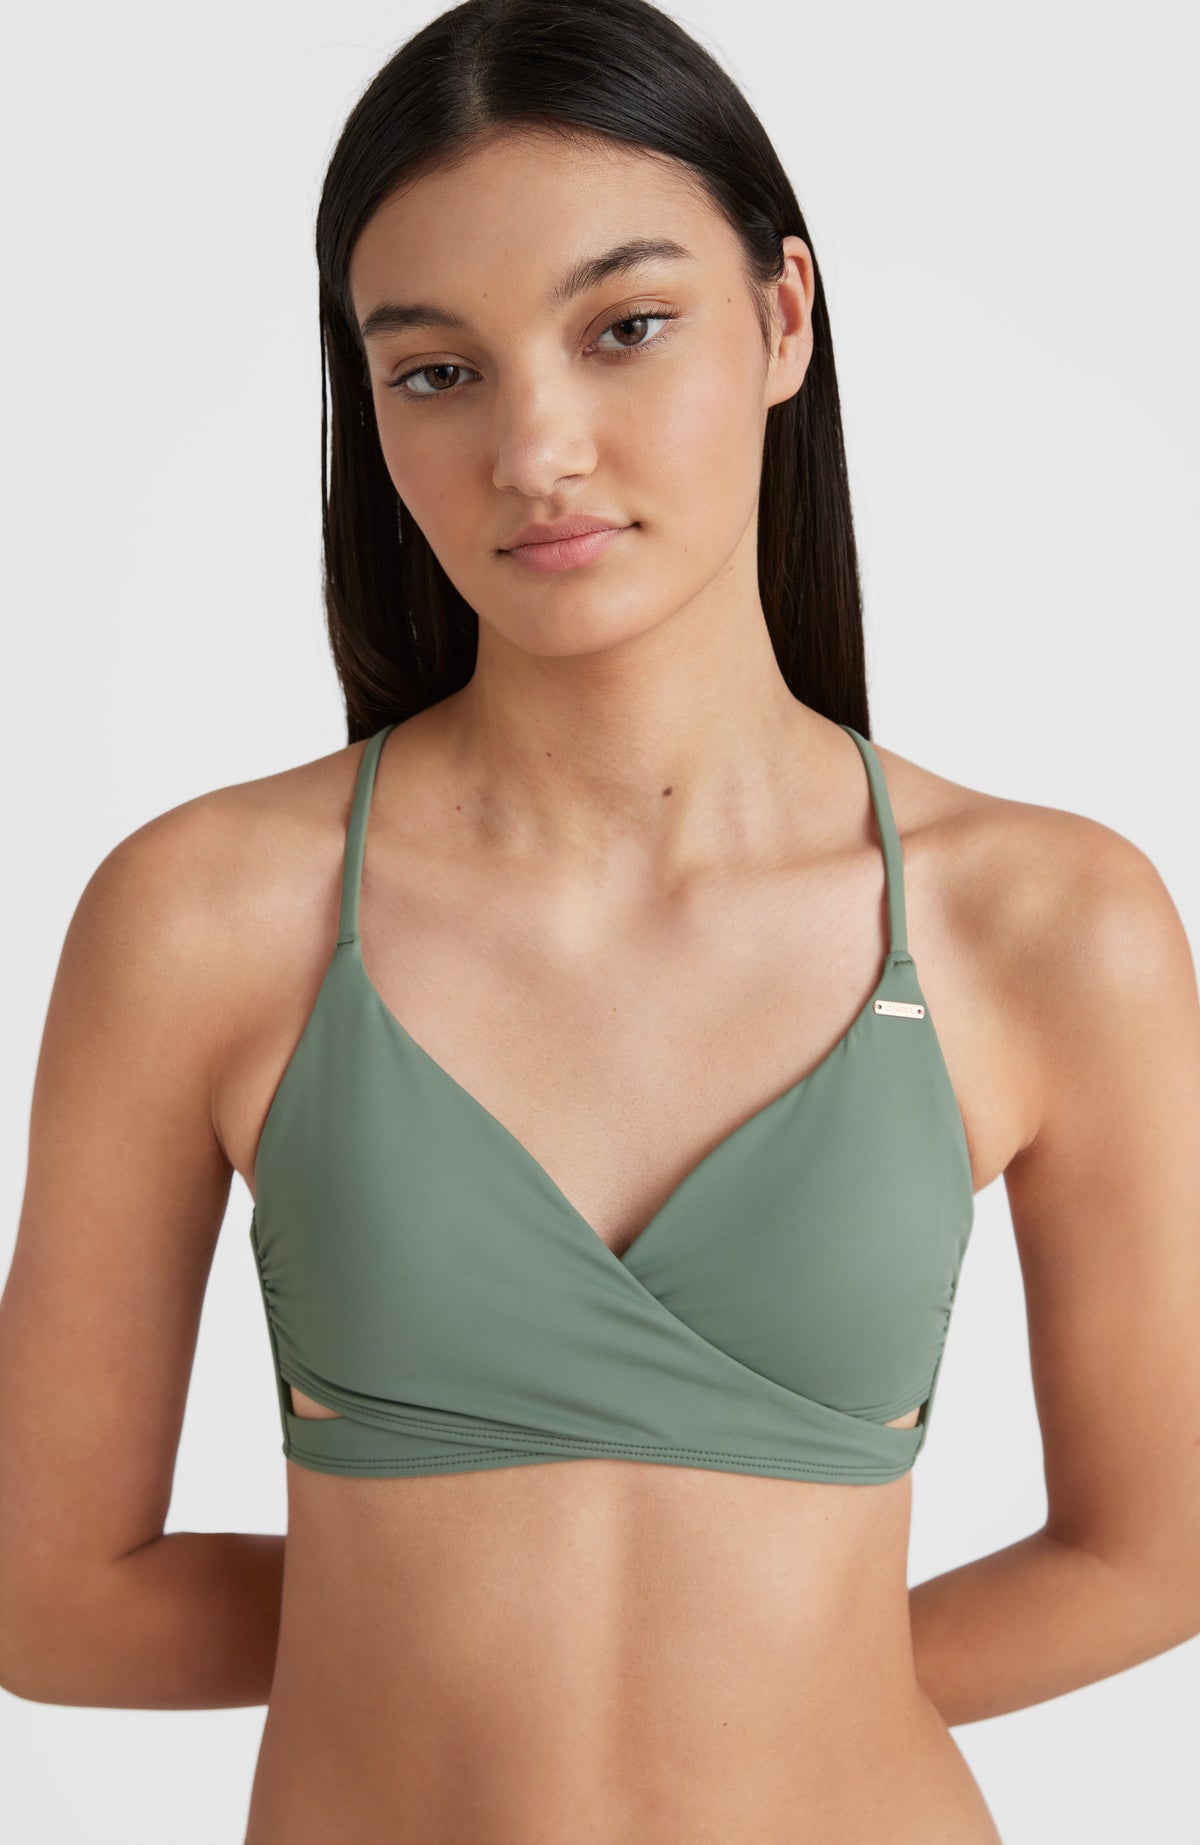 Shop HIIT Women's Bralettes up to 60% Off